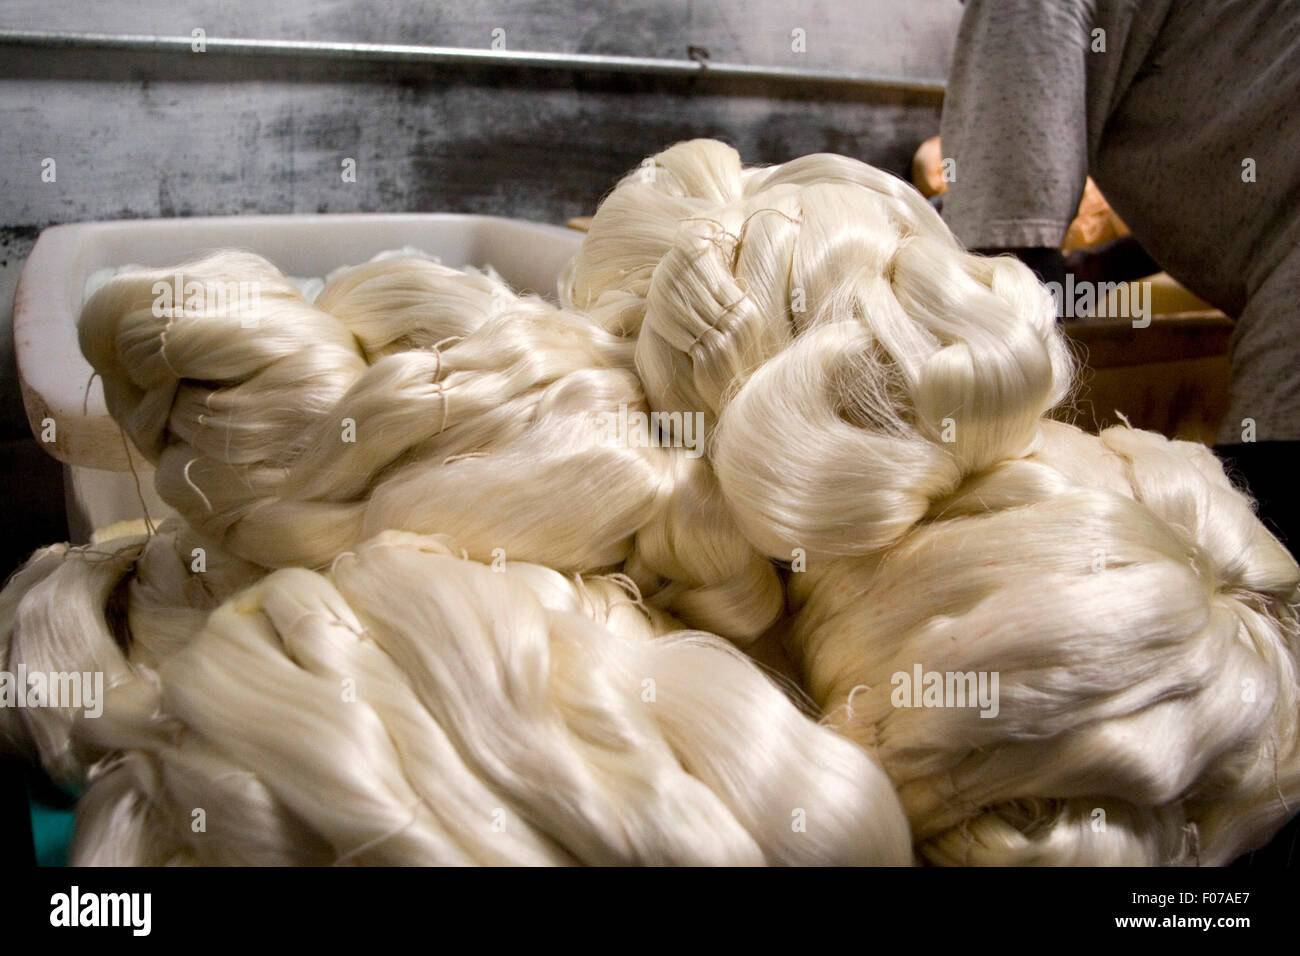 Raw silk is bundled and washed by hand at the state run silk factory in Mysore. Sericure - silk production - has been practiced in Mysore State since Tipu Sultan encouraged it in the late 18th century, with French aid, as a means of growing economically to beat the British. Silk production in modern Karnataka is undergoing something of a renaissance, with increased production figures and increased demand from an increasingly wealthy Indian population. Stock Photo